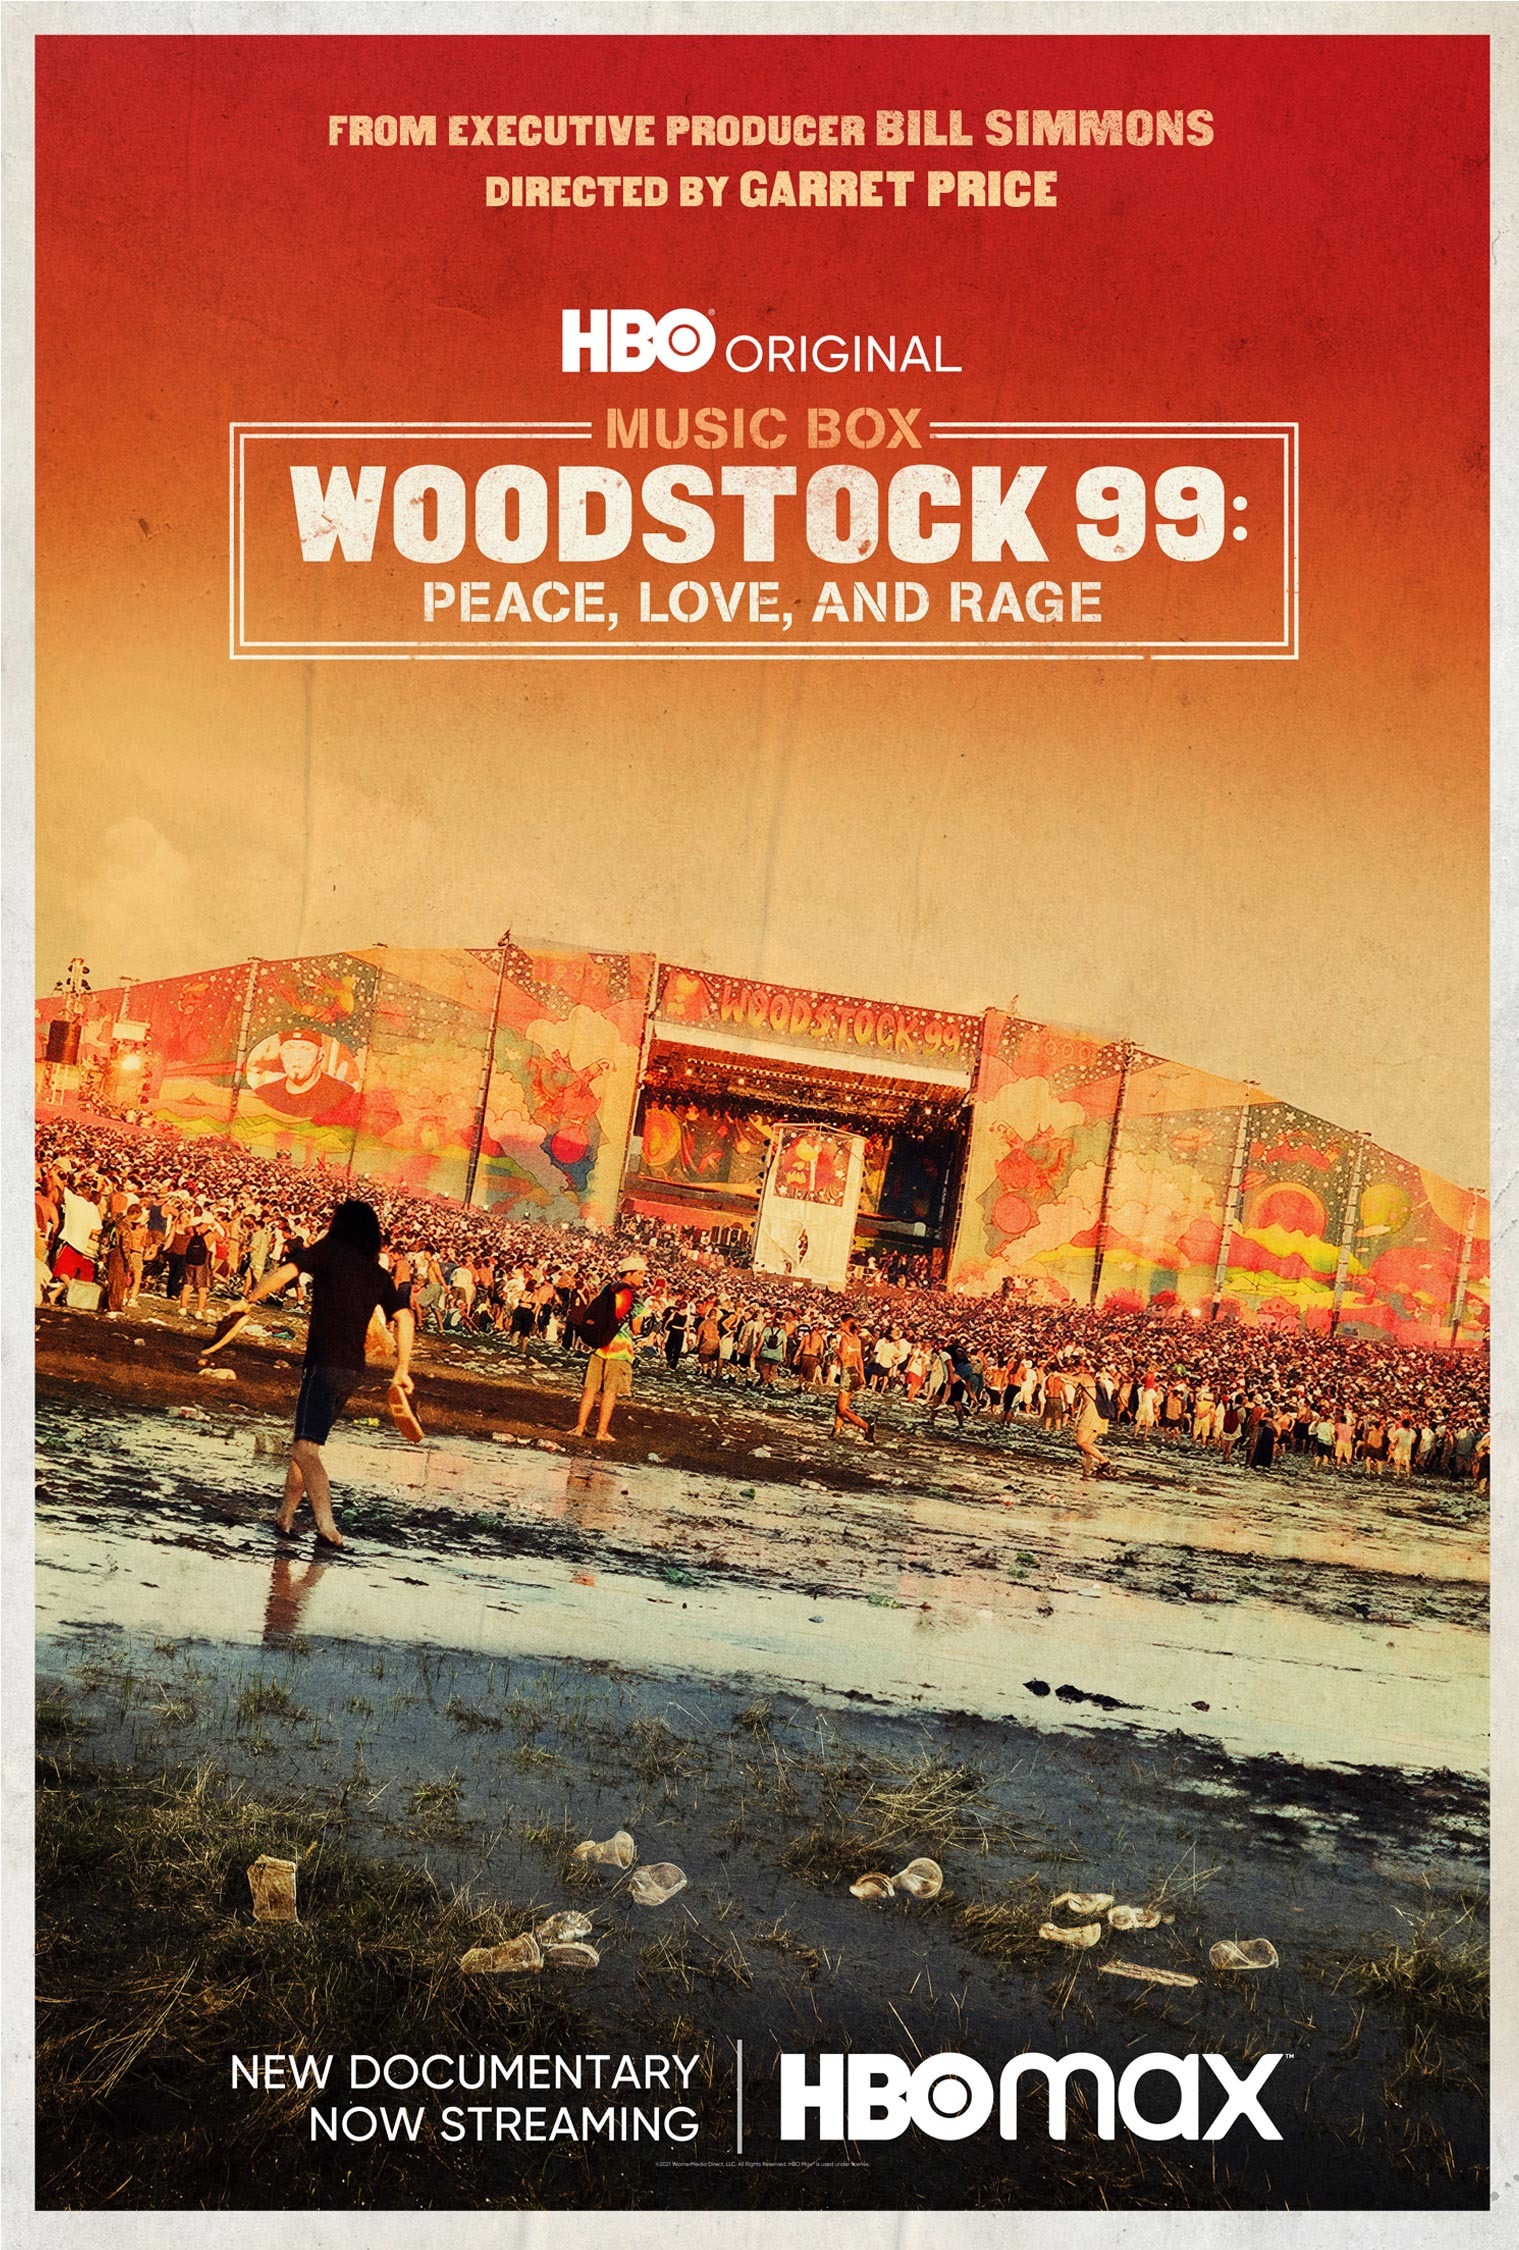 Mega Sized Movie Poster Image for Woodstock 99: Peace Love and Rage 